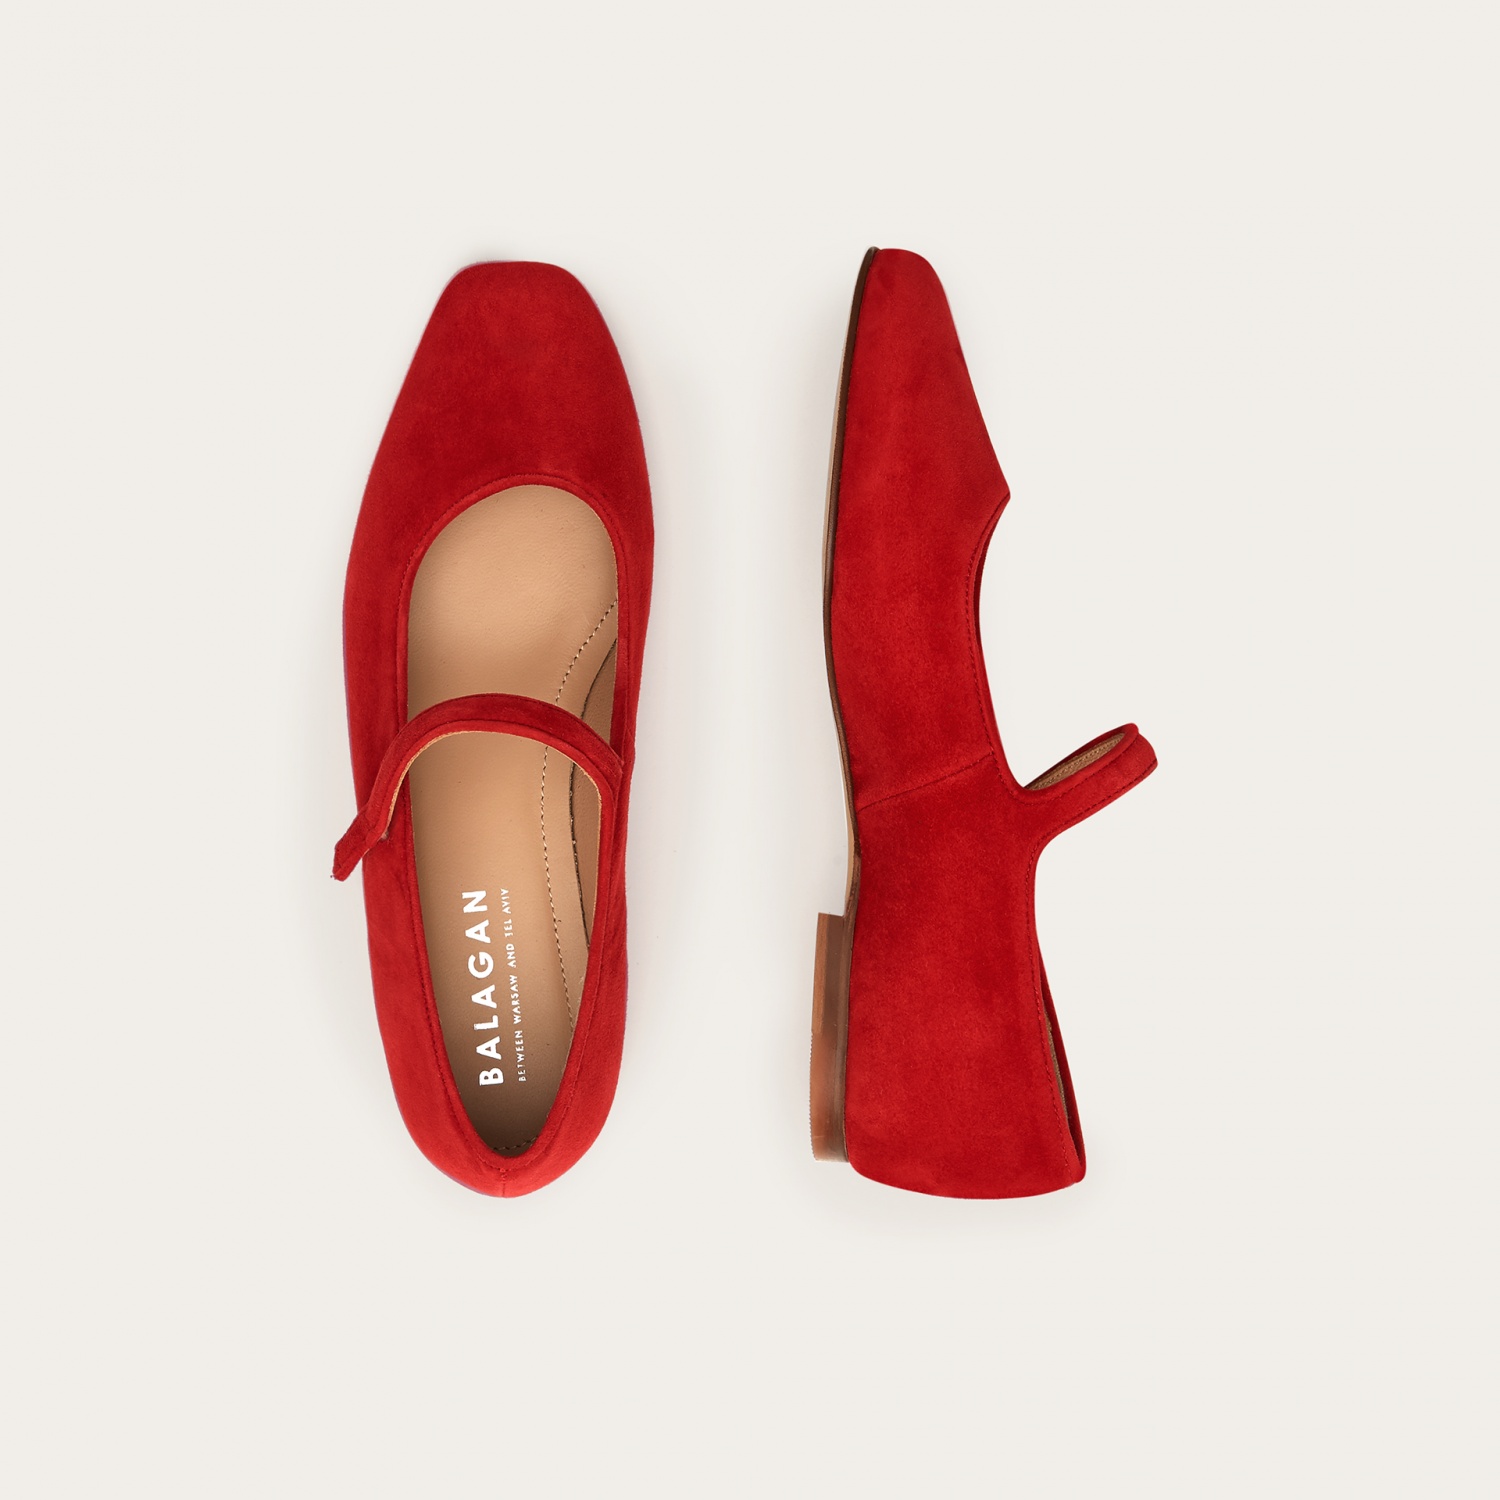  Pass Ballerina, red suede OUTLET-2 